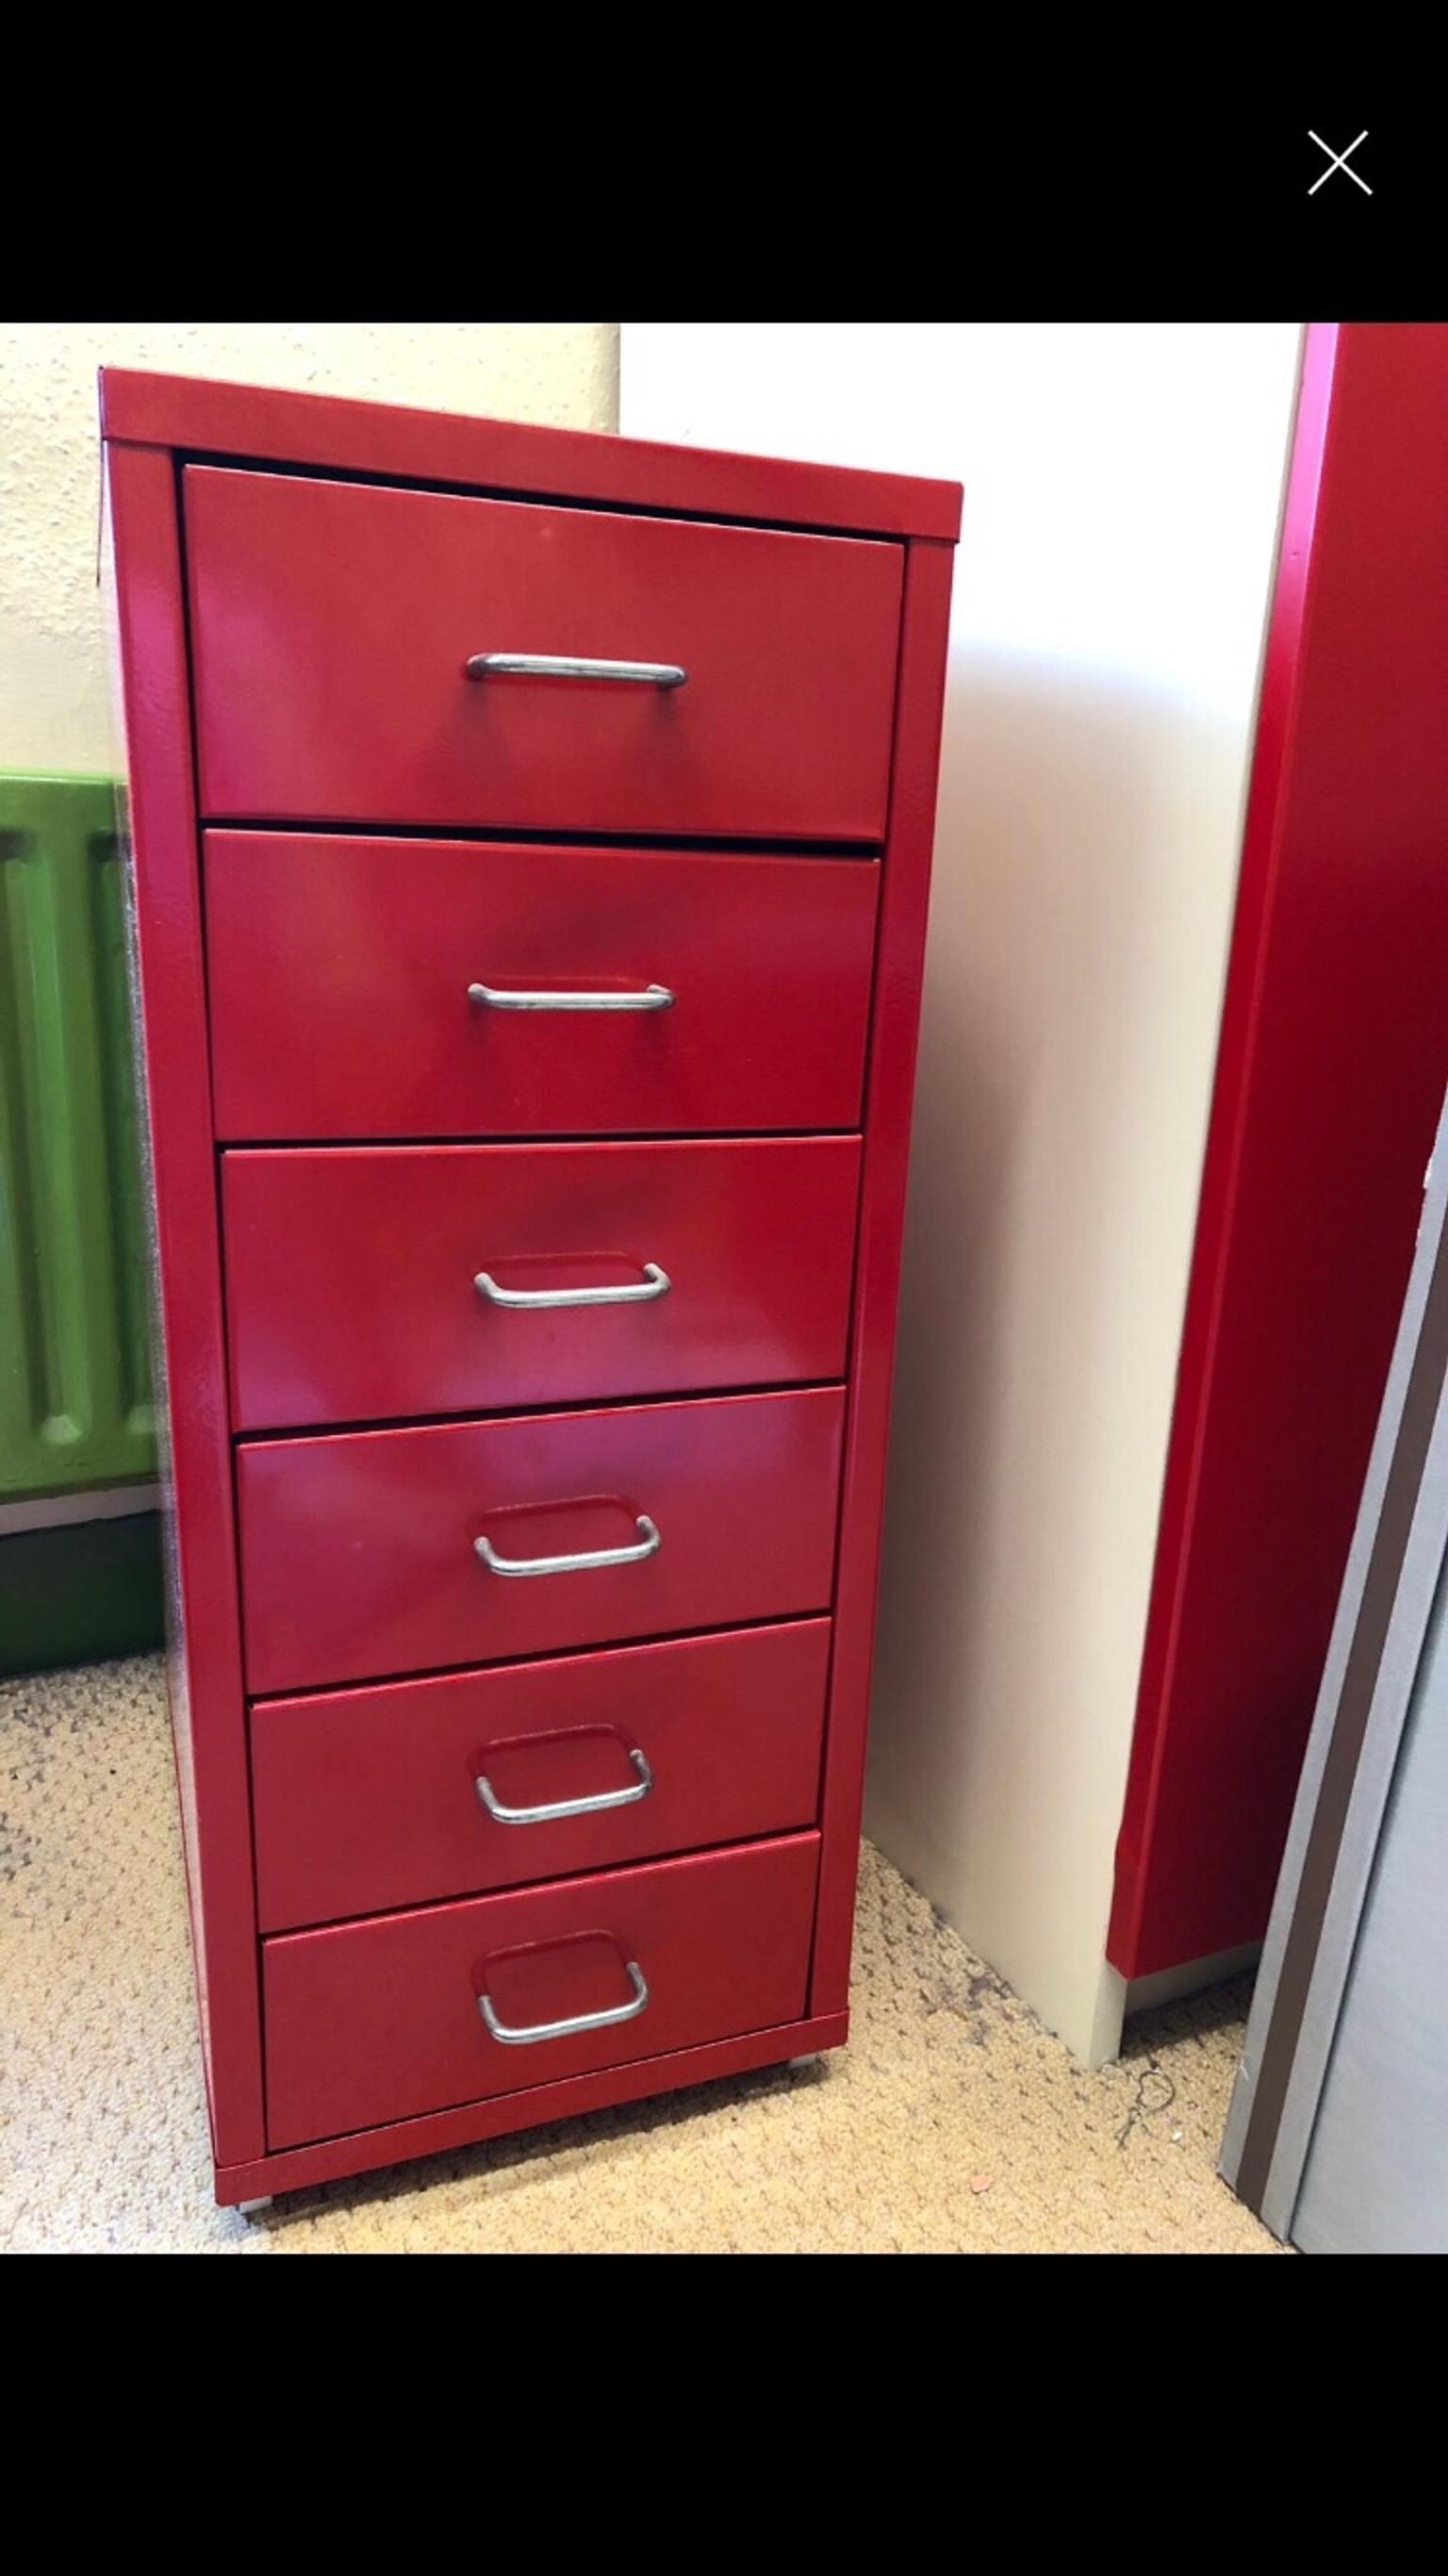 Ikea Metal Filing Cabinet In Ha0 London For 20 00 For Sale Shpock